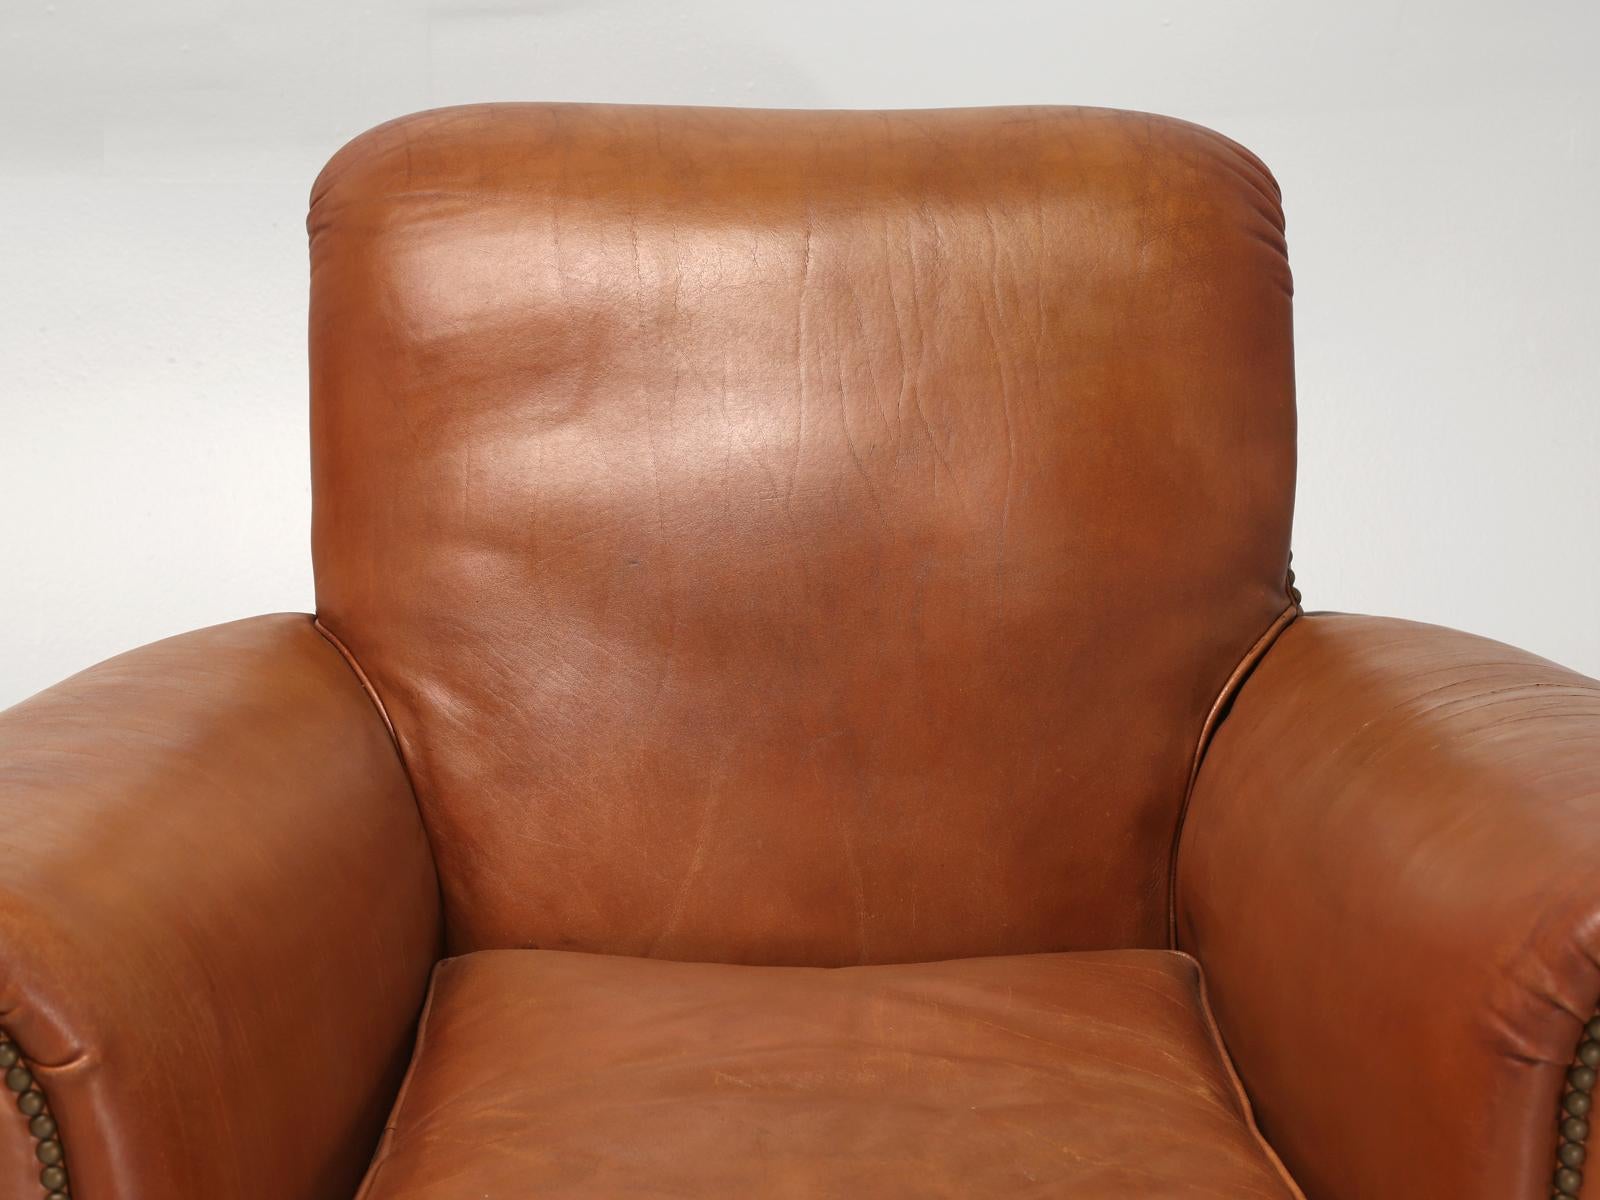 French leather club chairs that our in house Old Plank upholstery department restored internally, while leaving all of the leather original. The condition of the lamb hides are incredibly still soft and supple. This particular pair still has the